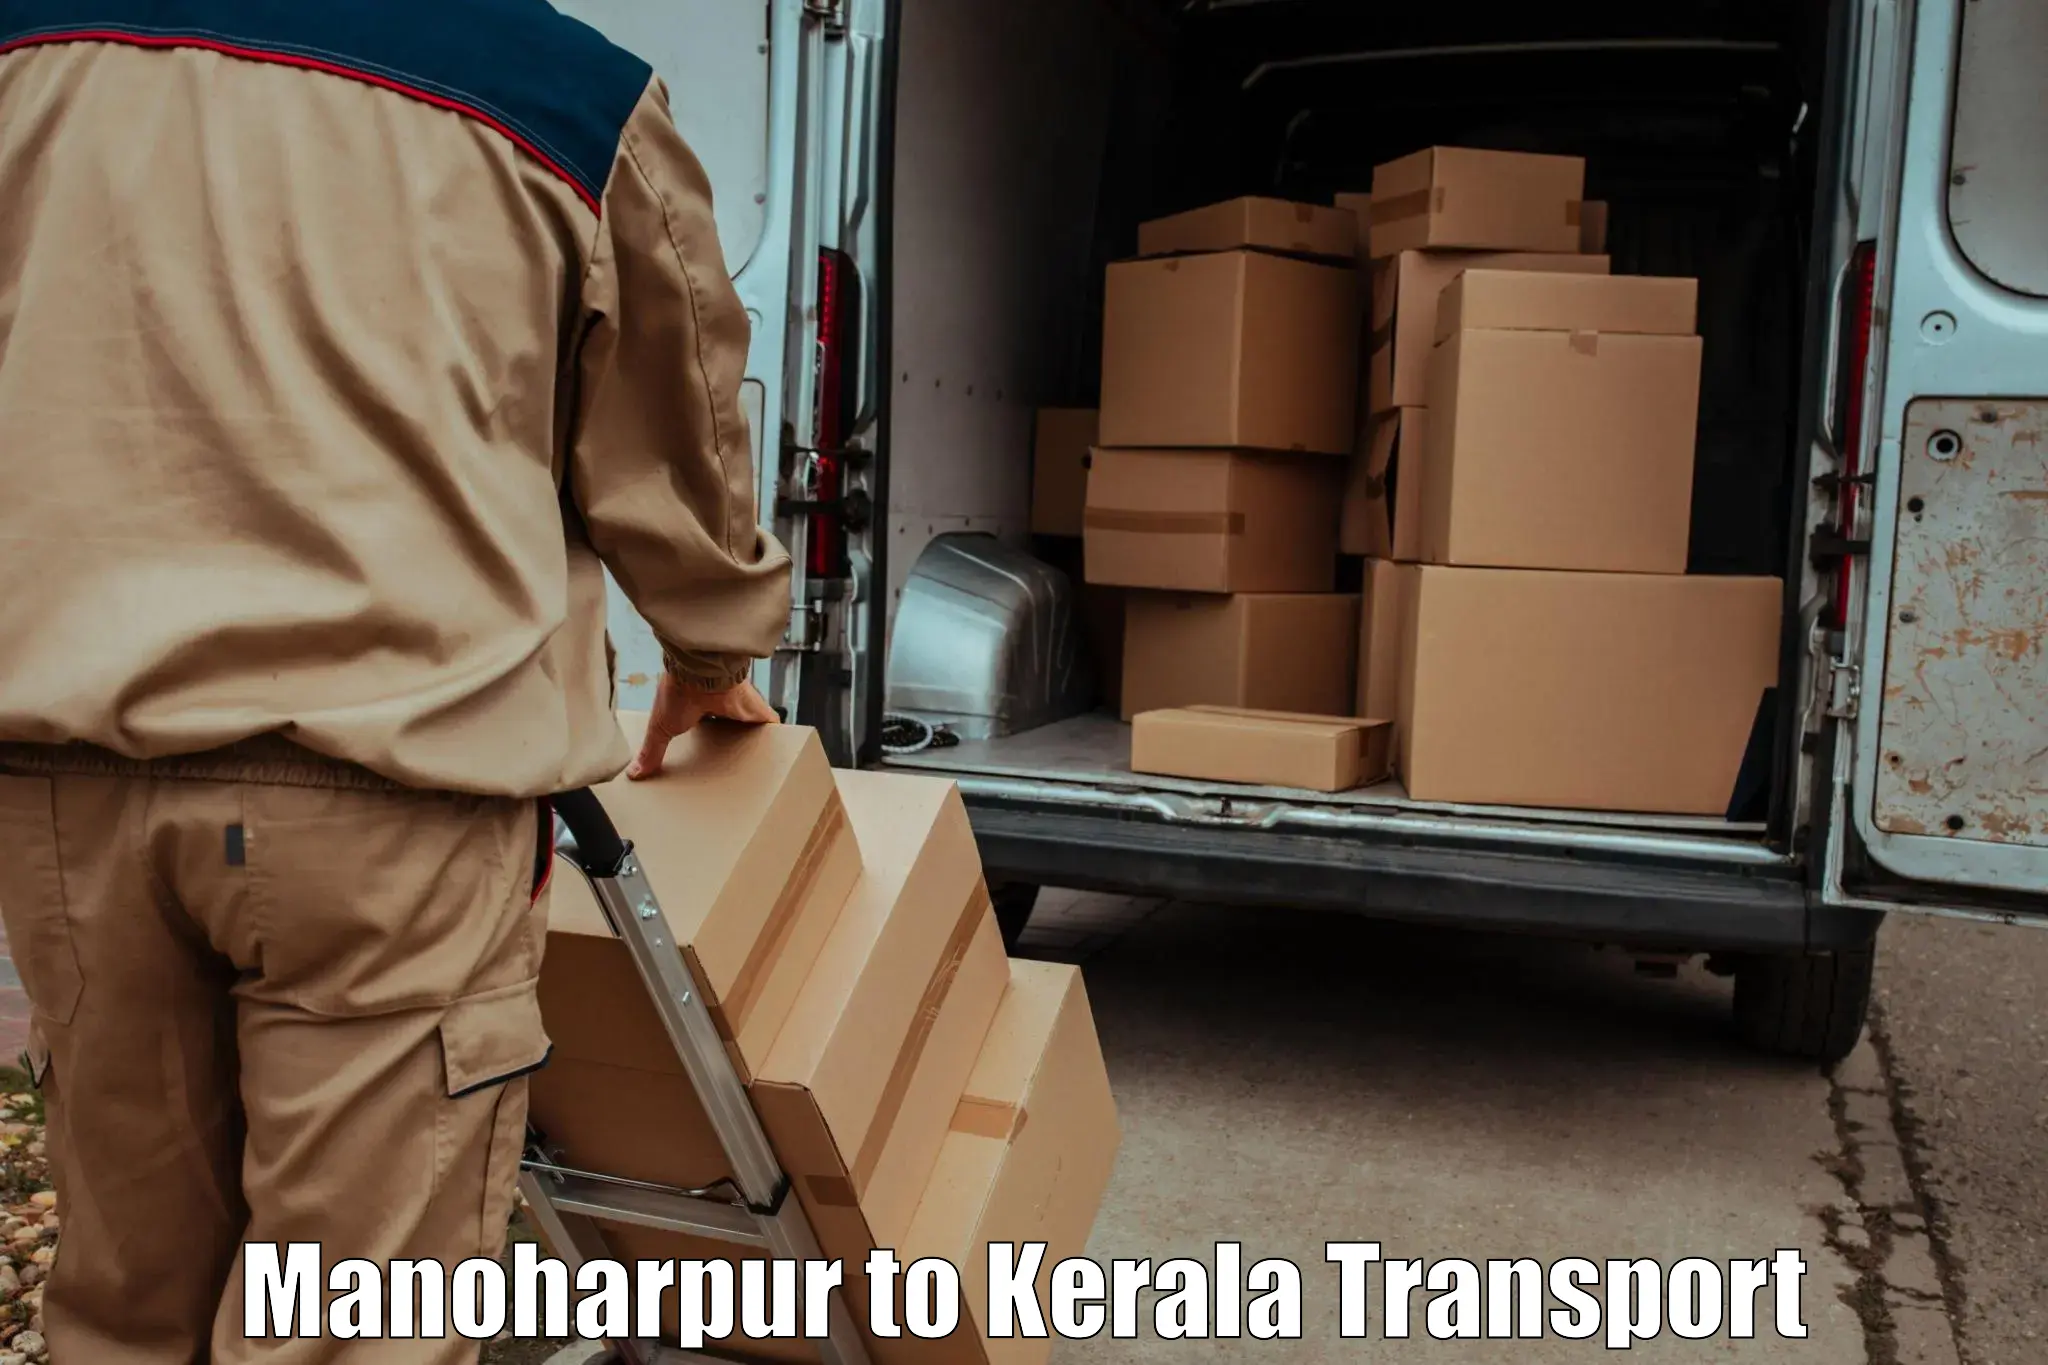 Transport bike from one state to another in Manoharpur to Kalpetta